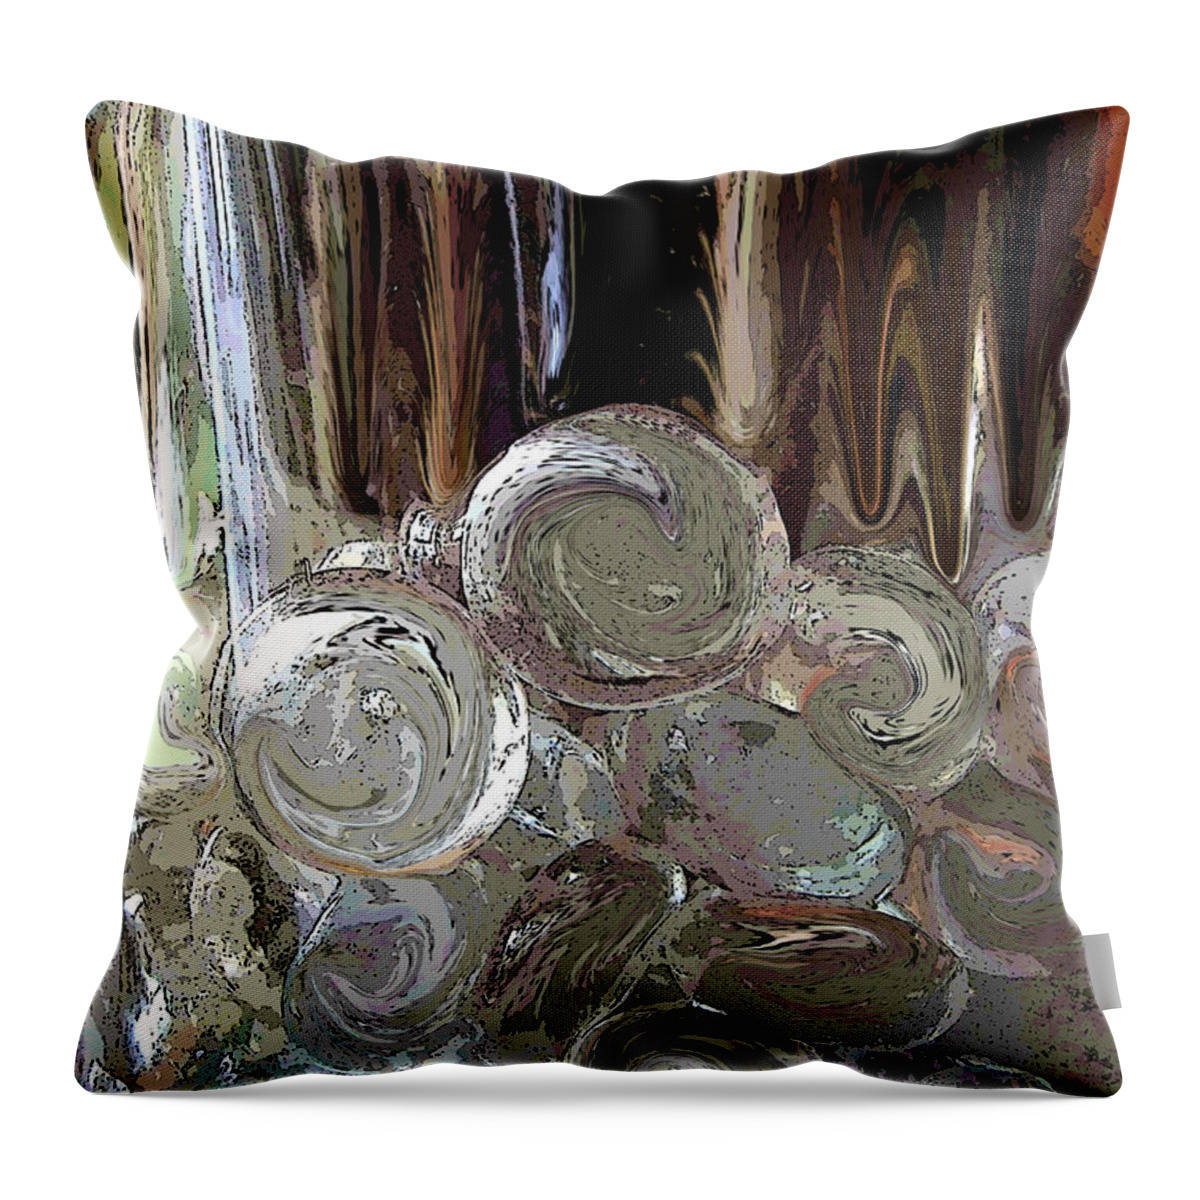 Glass Throw Pillow featuring the digital art Glass in glass by Mary Bedy